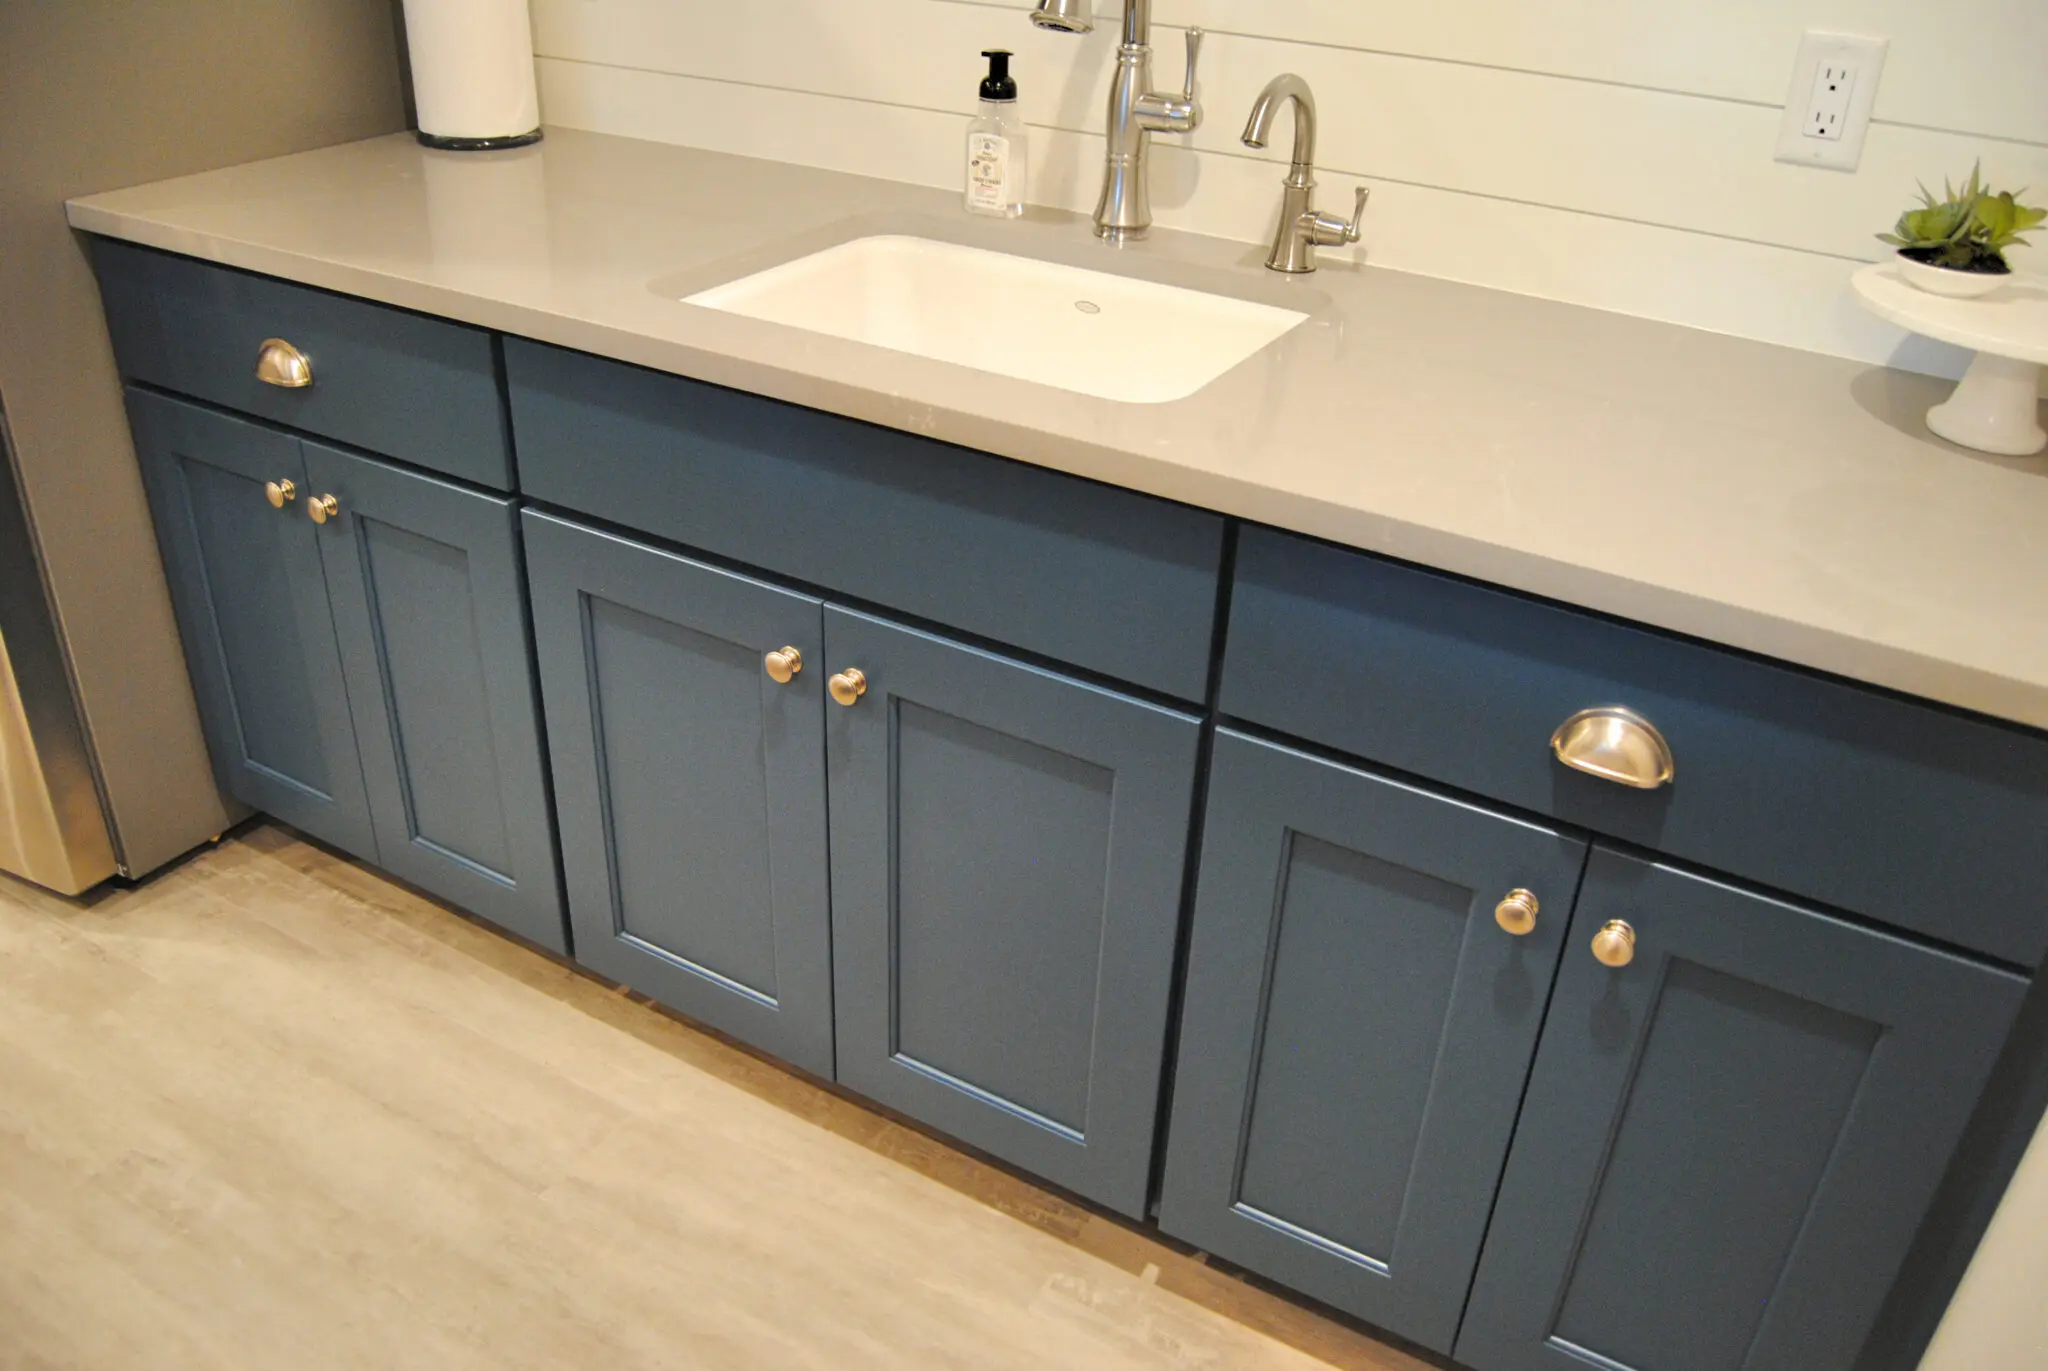 The house sink unit with gray bathroom wall cabinet